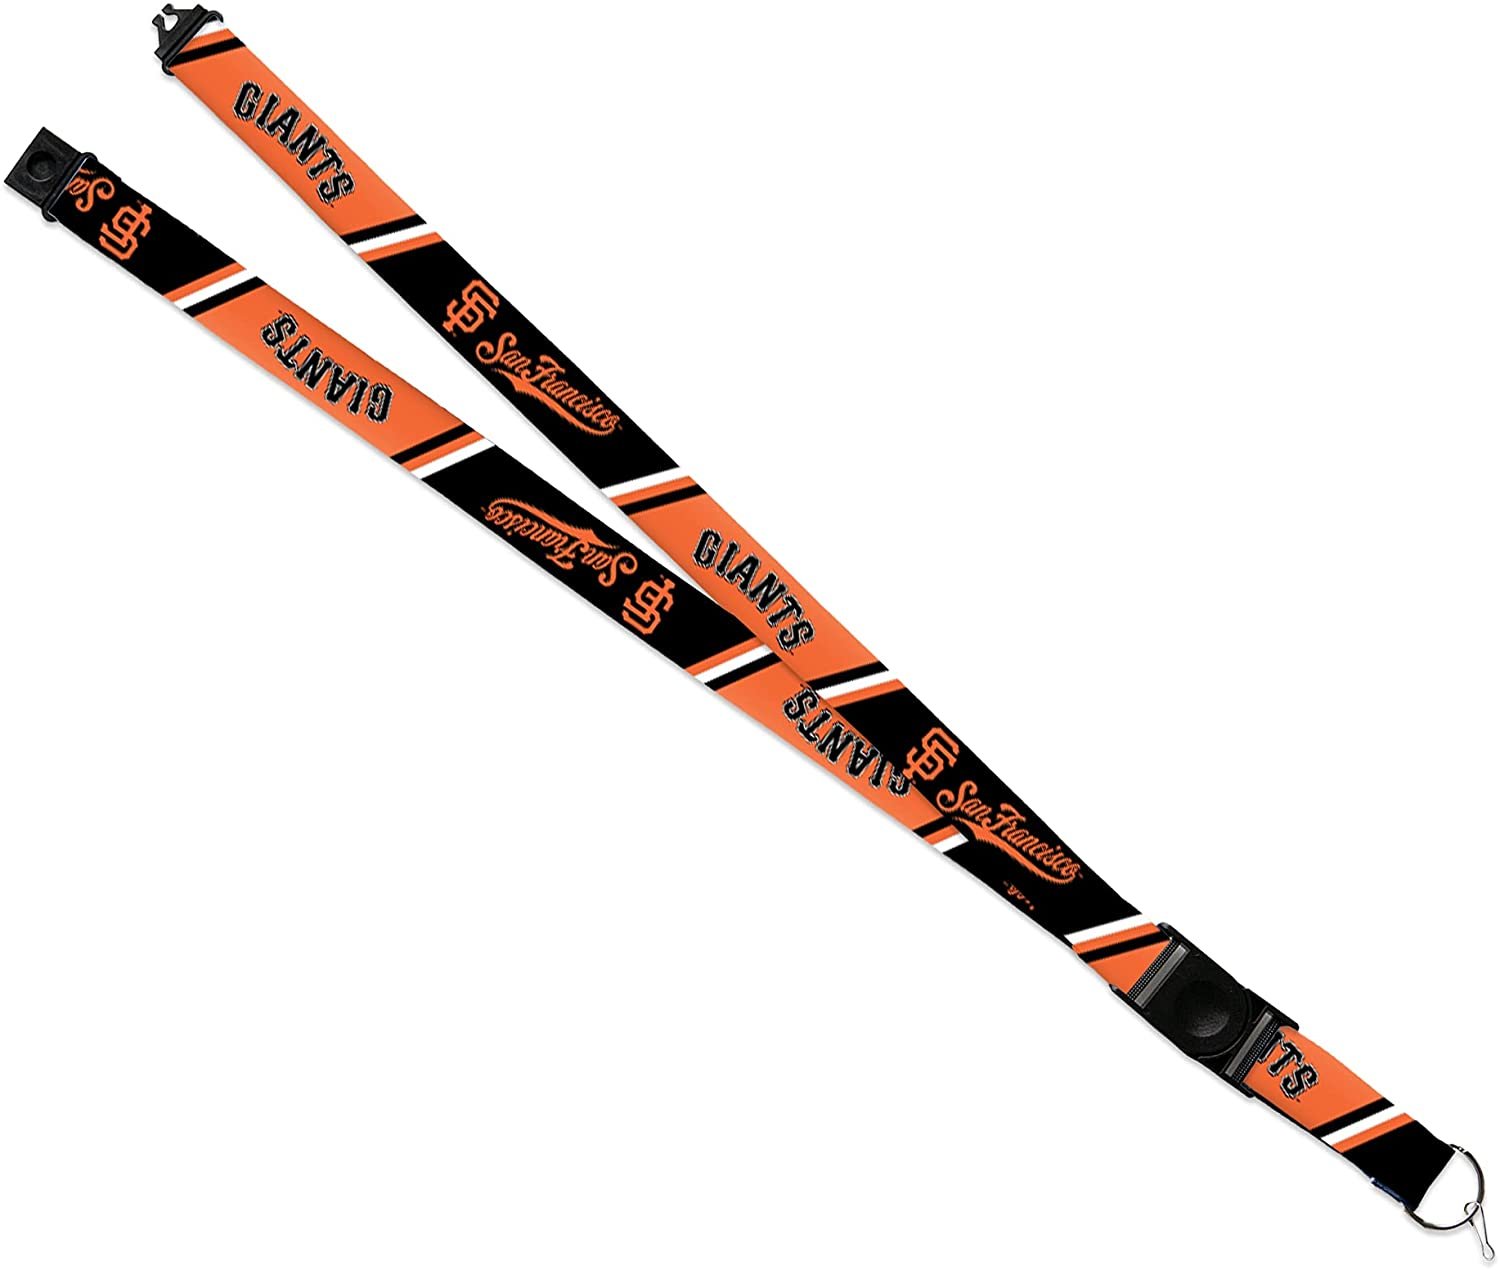 San Francisco Giants Lanyard Keychain Double Sided 18 Inch Button Clip Safety Breakaway